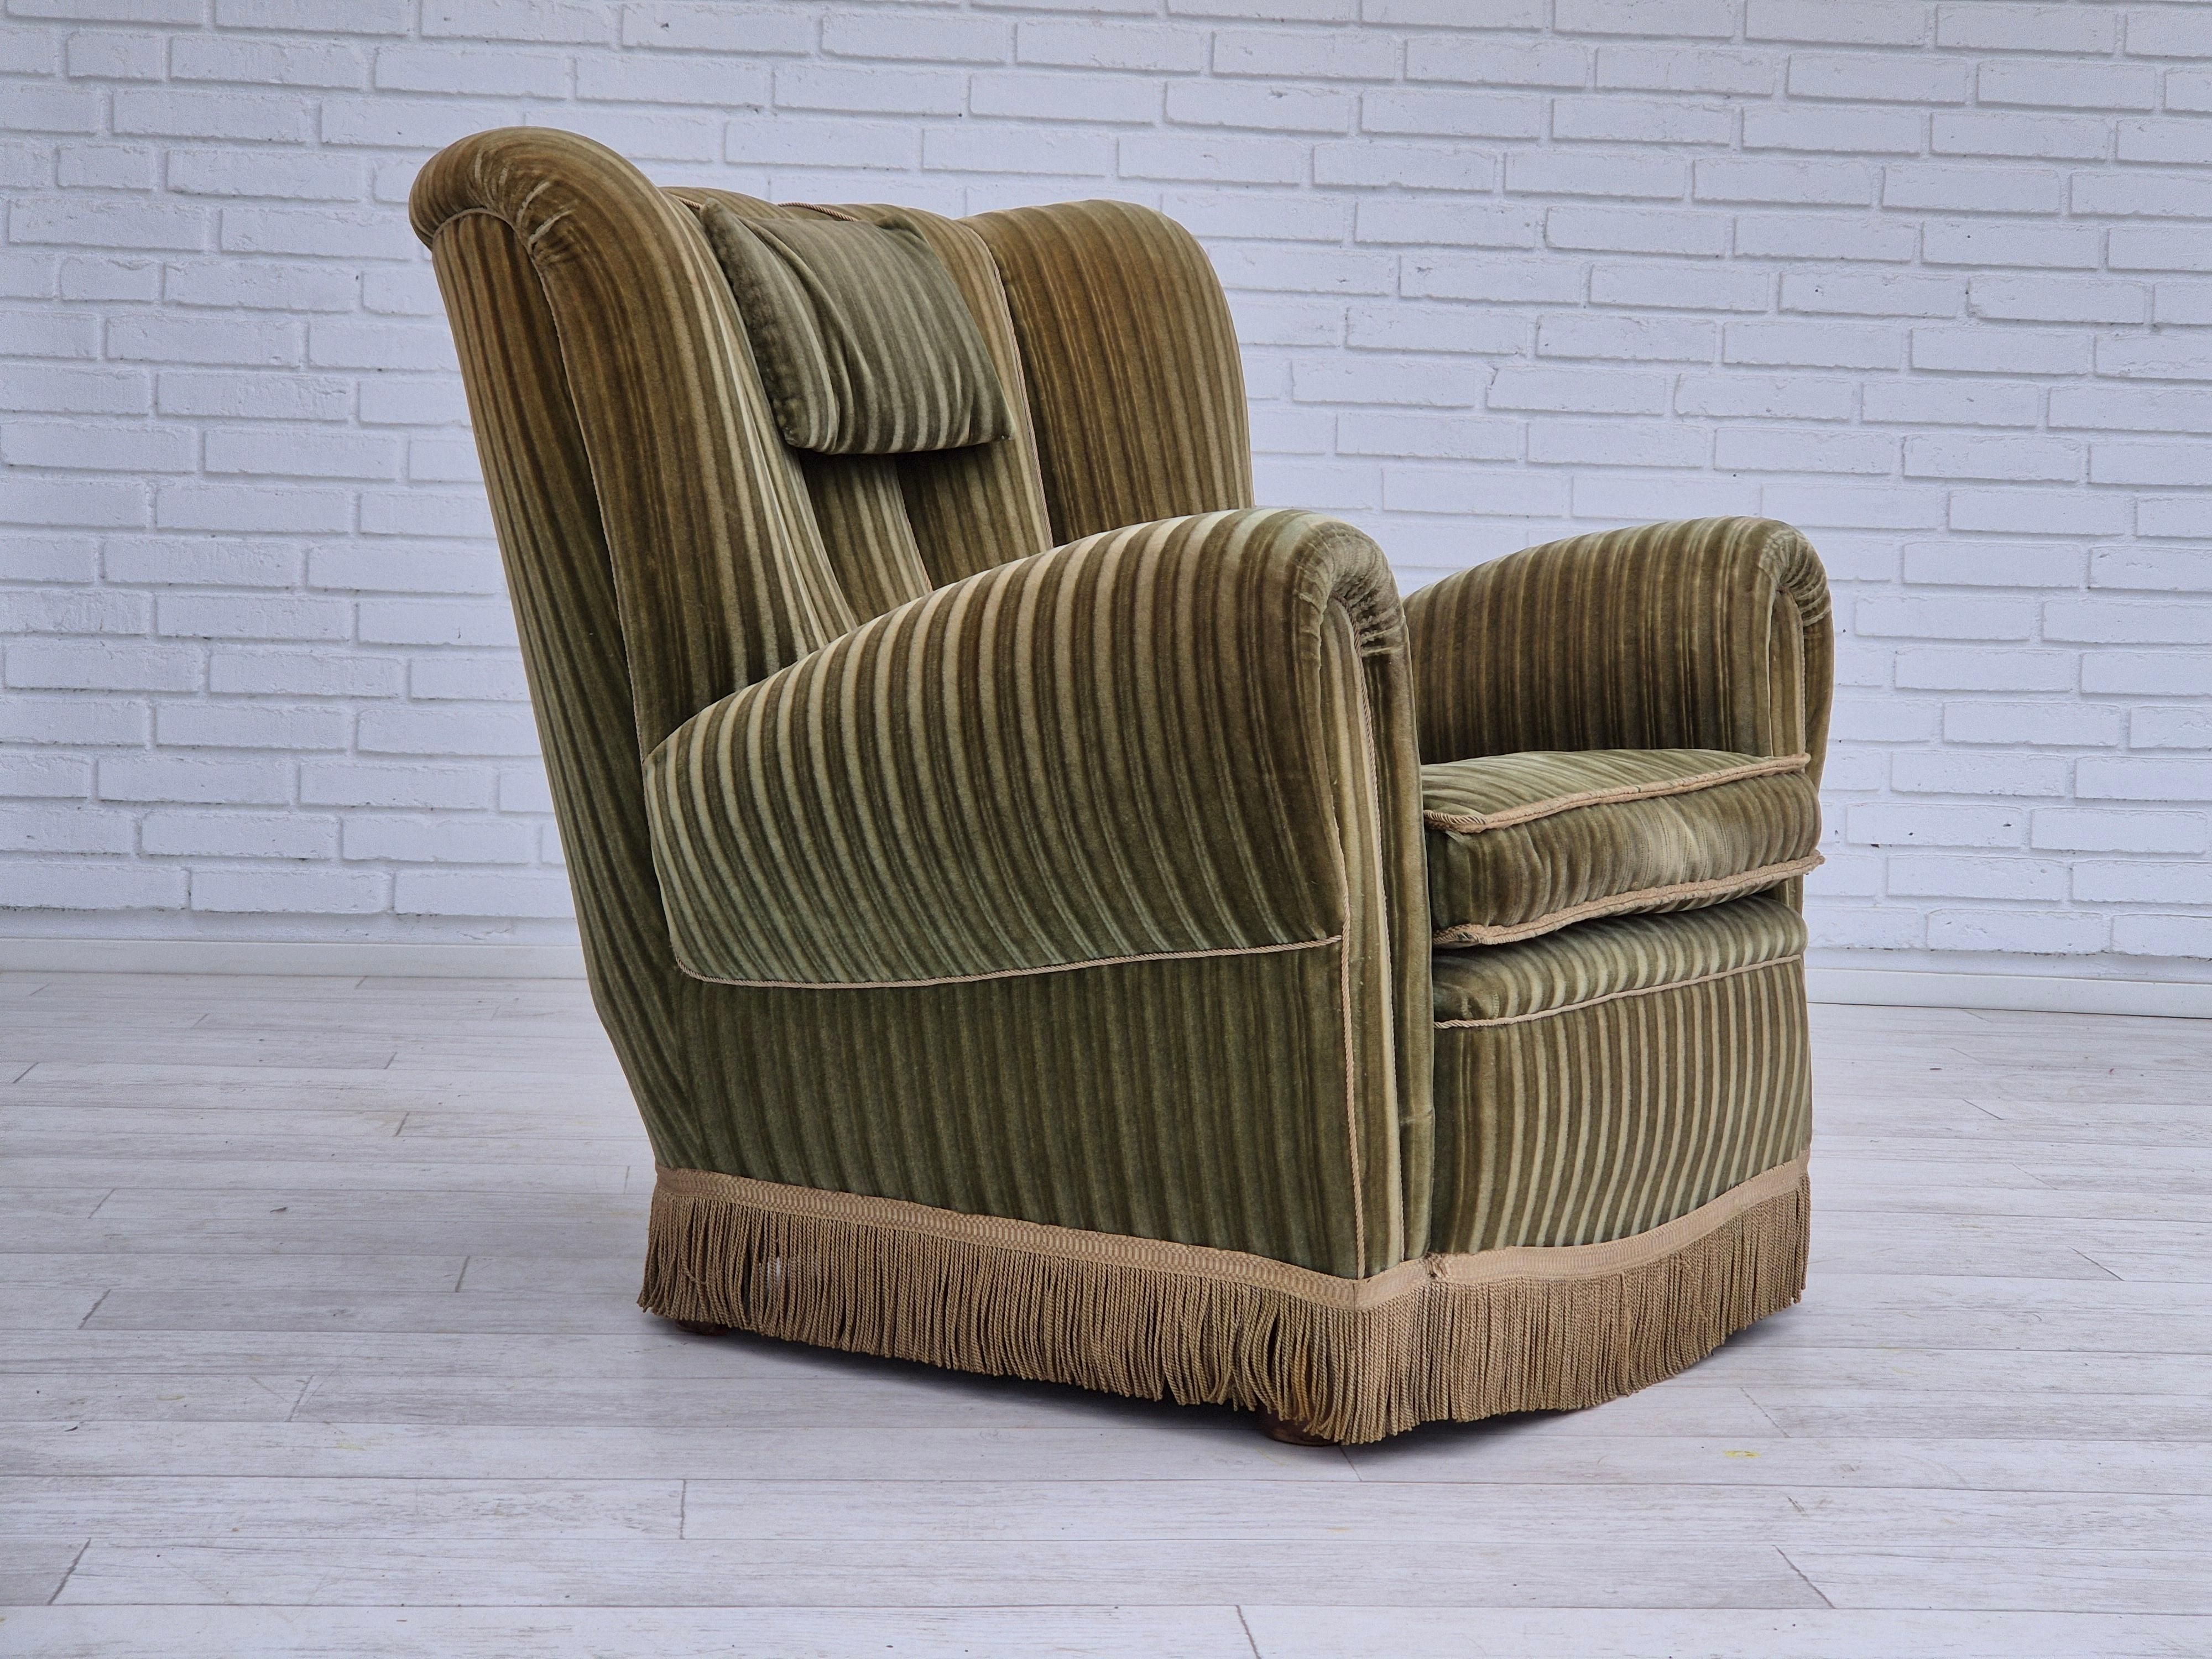 1960s, Danish relax armchair in original very good condition: no smells and no stains. Original green furniture velour. Springs in the seat, beech wood legs. Manufactured by Danish furniture manufacturer in about 1960-65s.